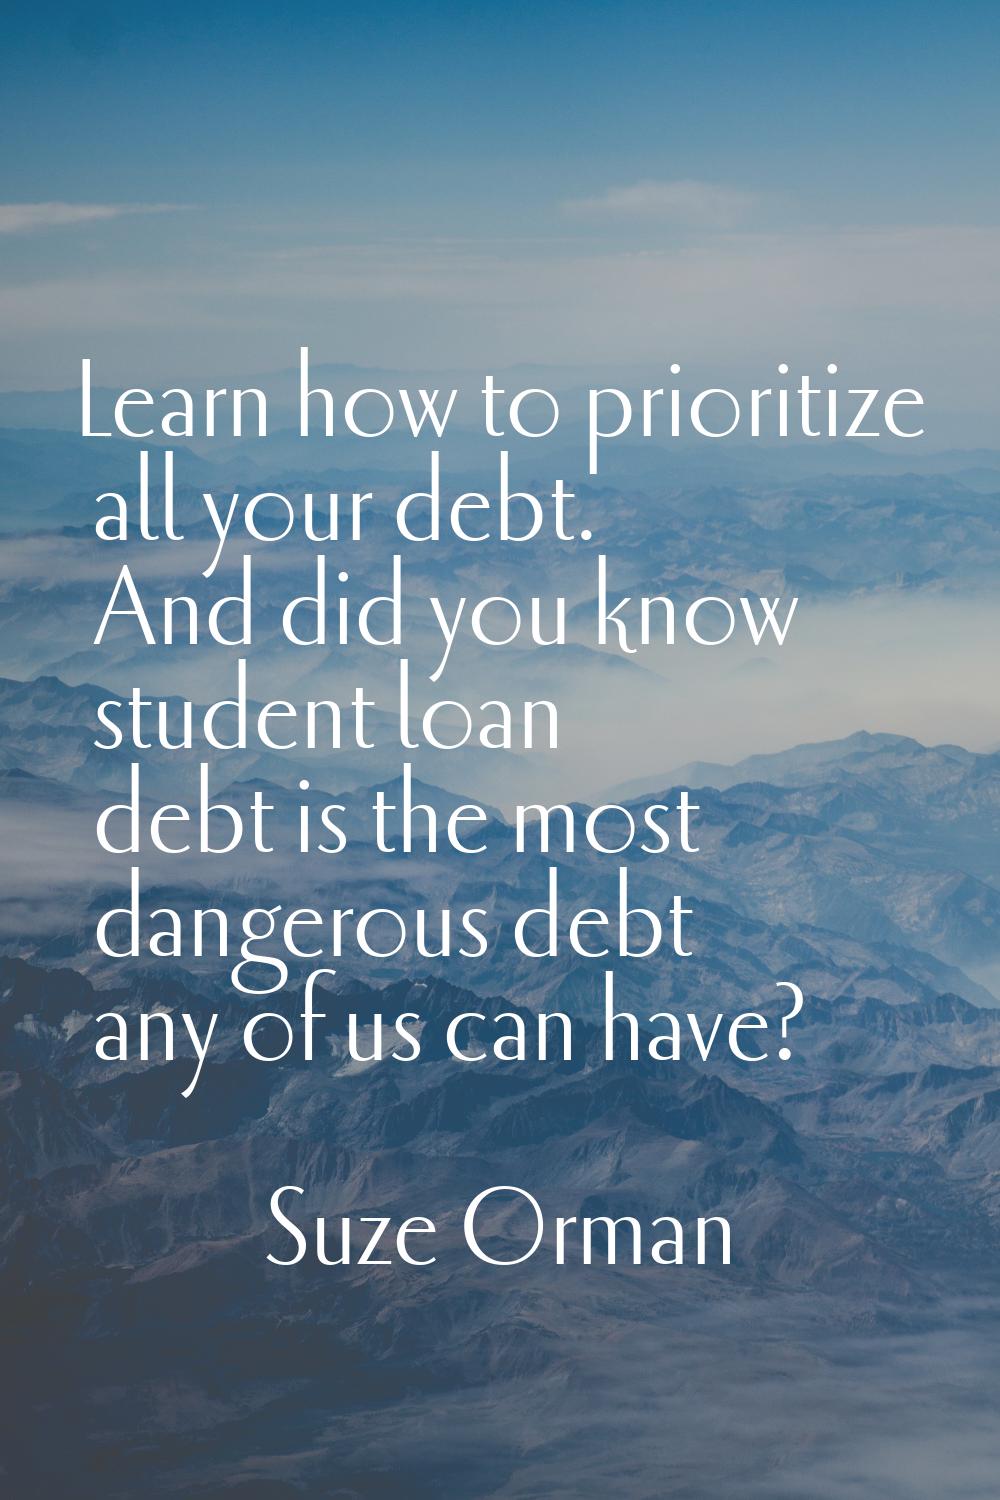 Learn how to prioritize all your debt. And did you know student loan debt is the most dangerous deb